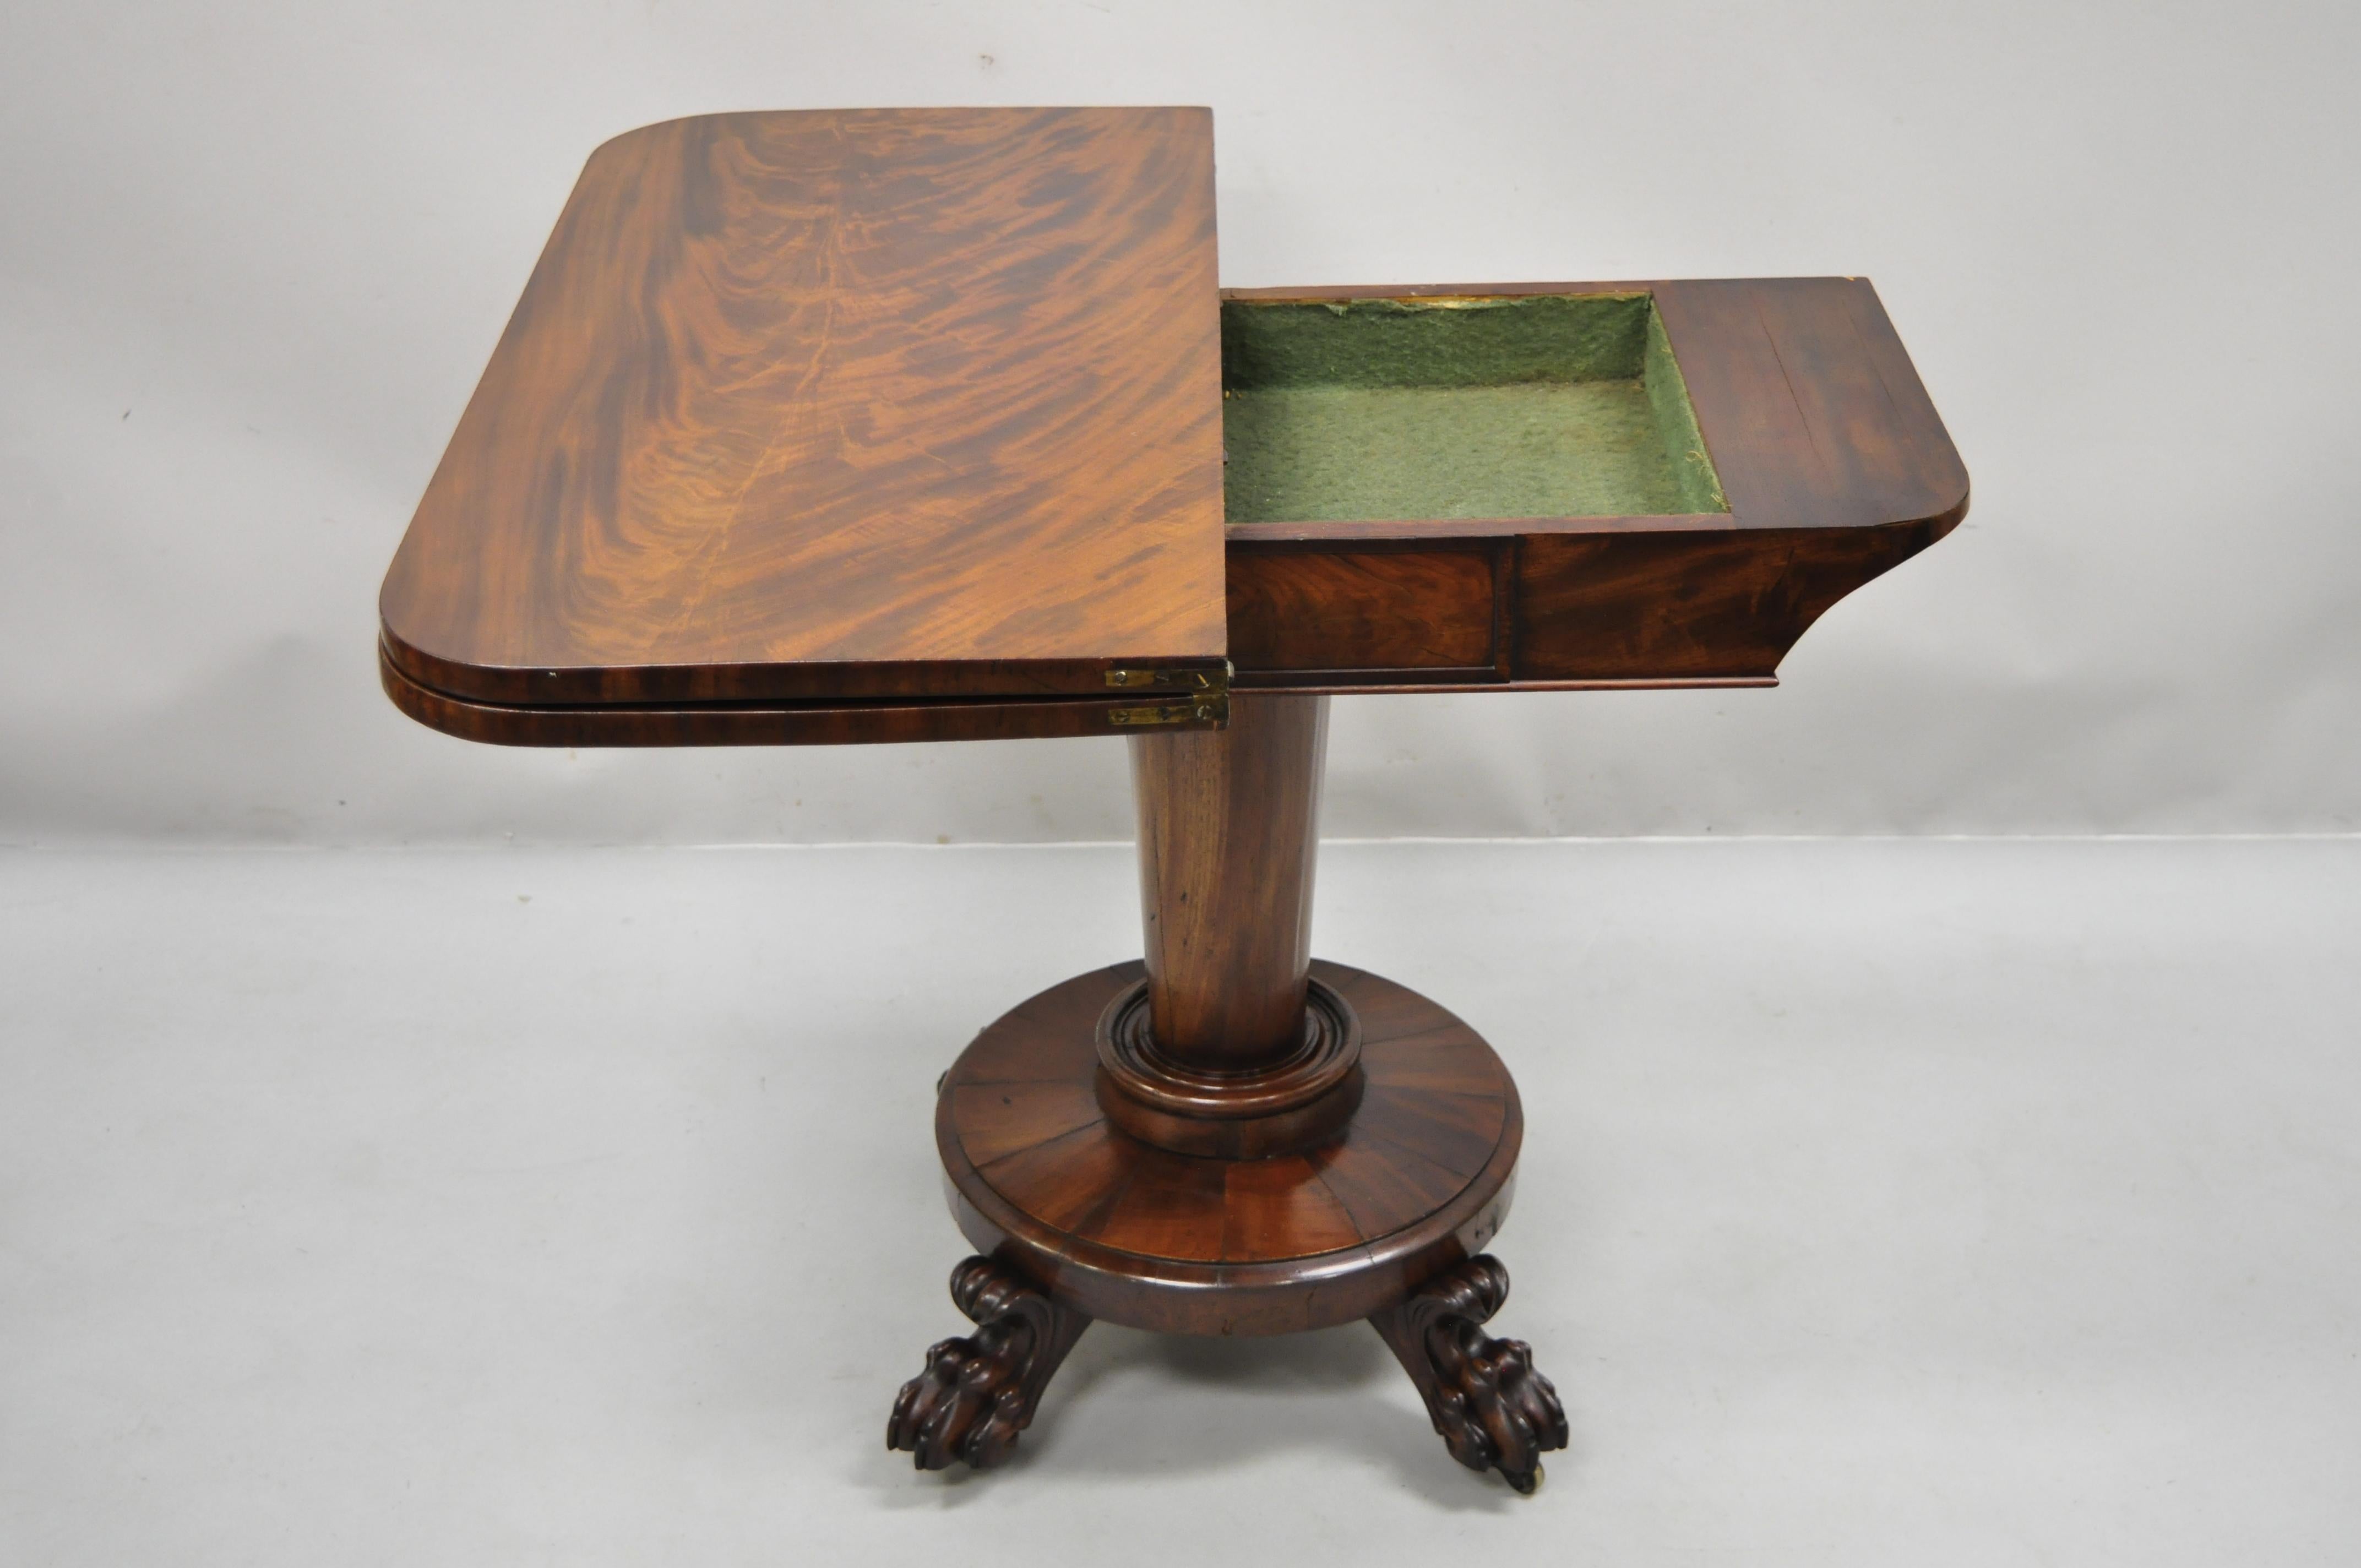 19th century American Empire crotch flame mahogany paw feet pedestal base console game table. Item features swivel and flip top, pedestal base, beautiful wood grain, nicely carved details, carved paw feet, very nice antique item, great style and